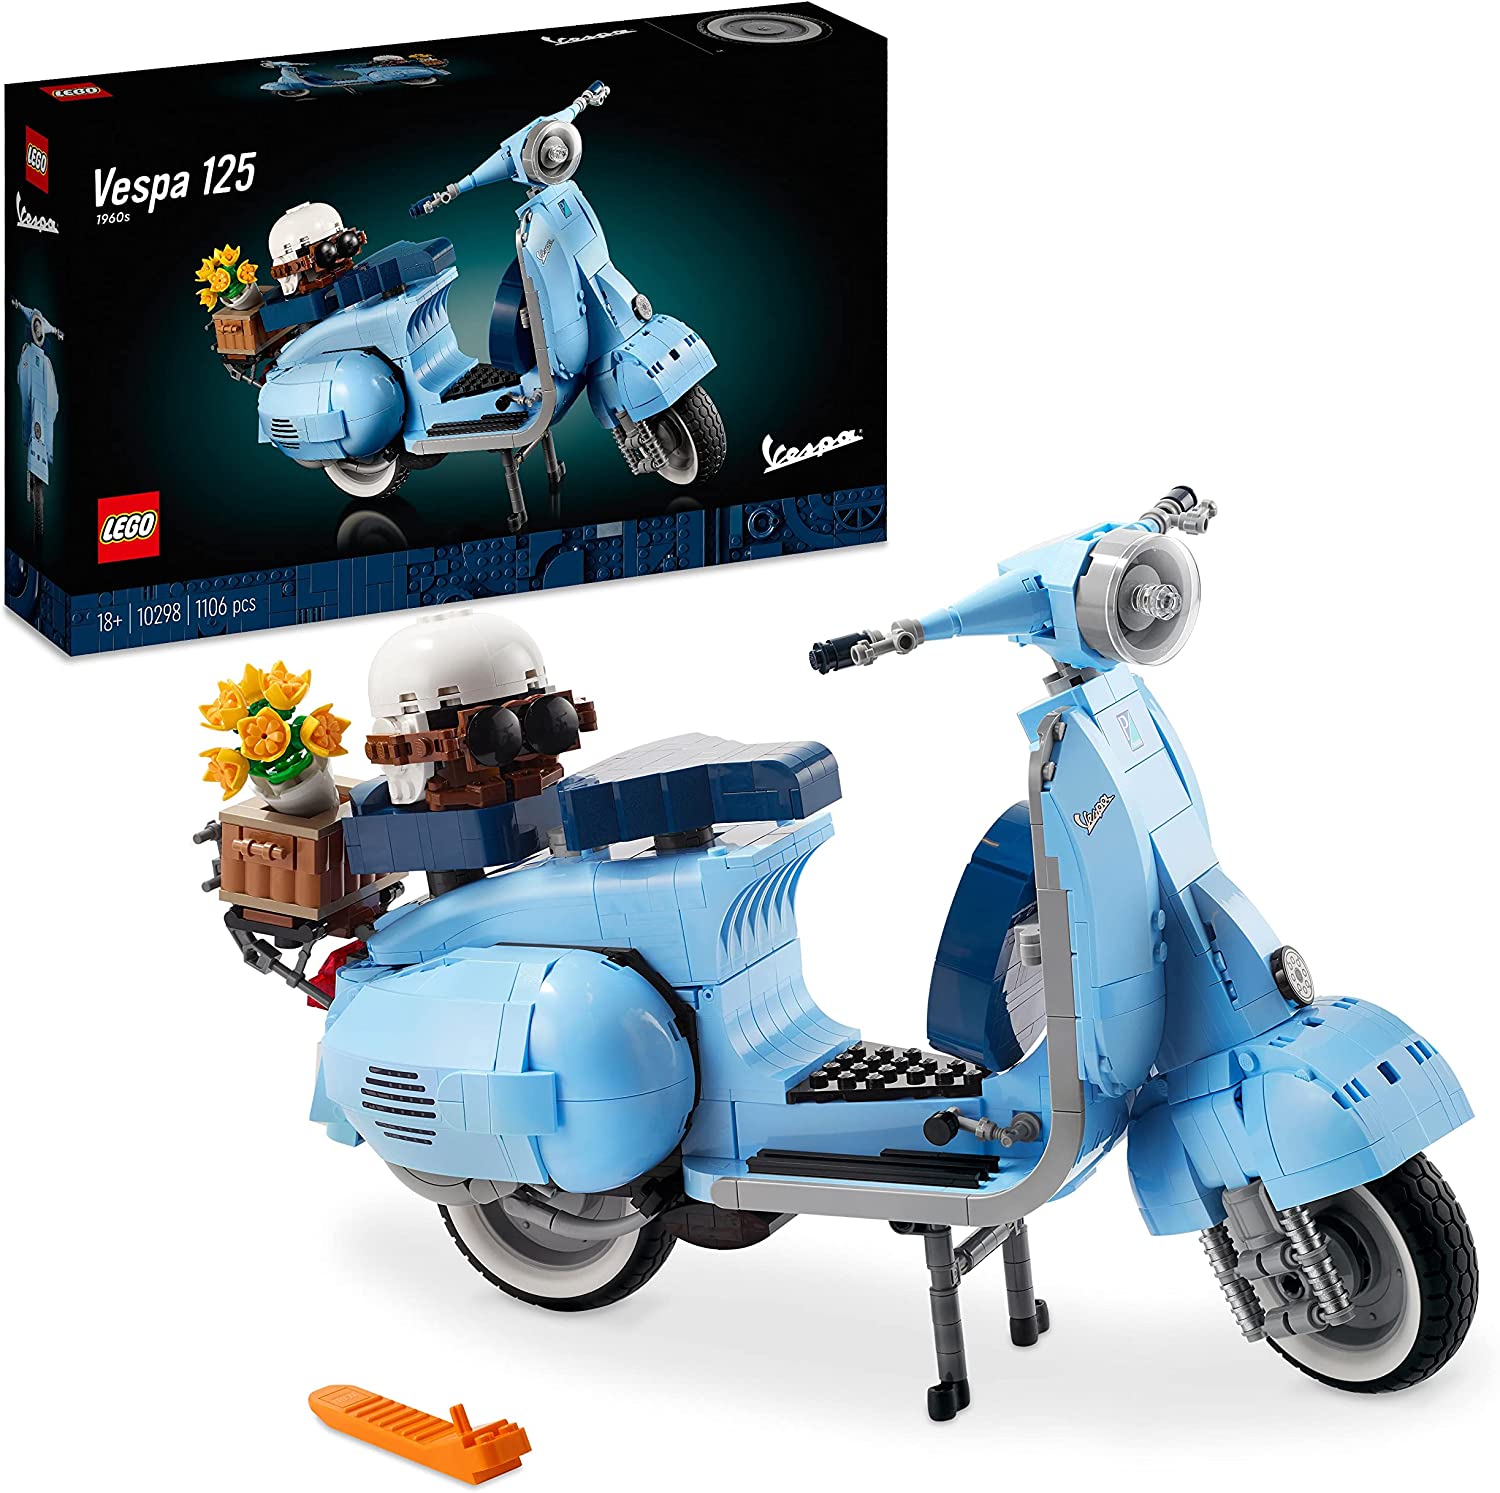 LEGO 10298 Vespa 125 Model Kit, Vintage Scooter from Italy, Set for Adults to Build and Display